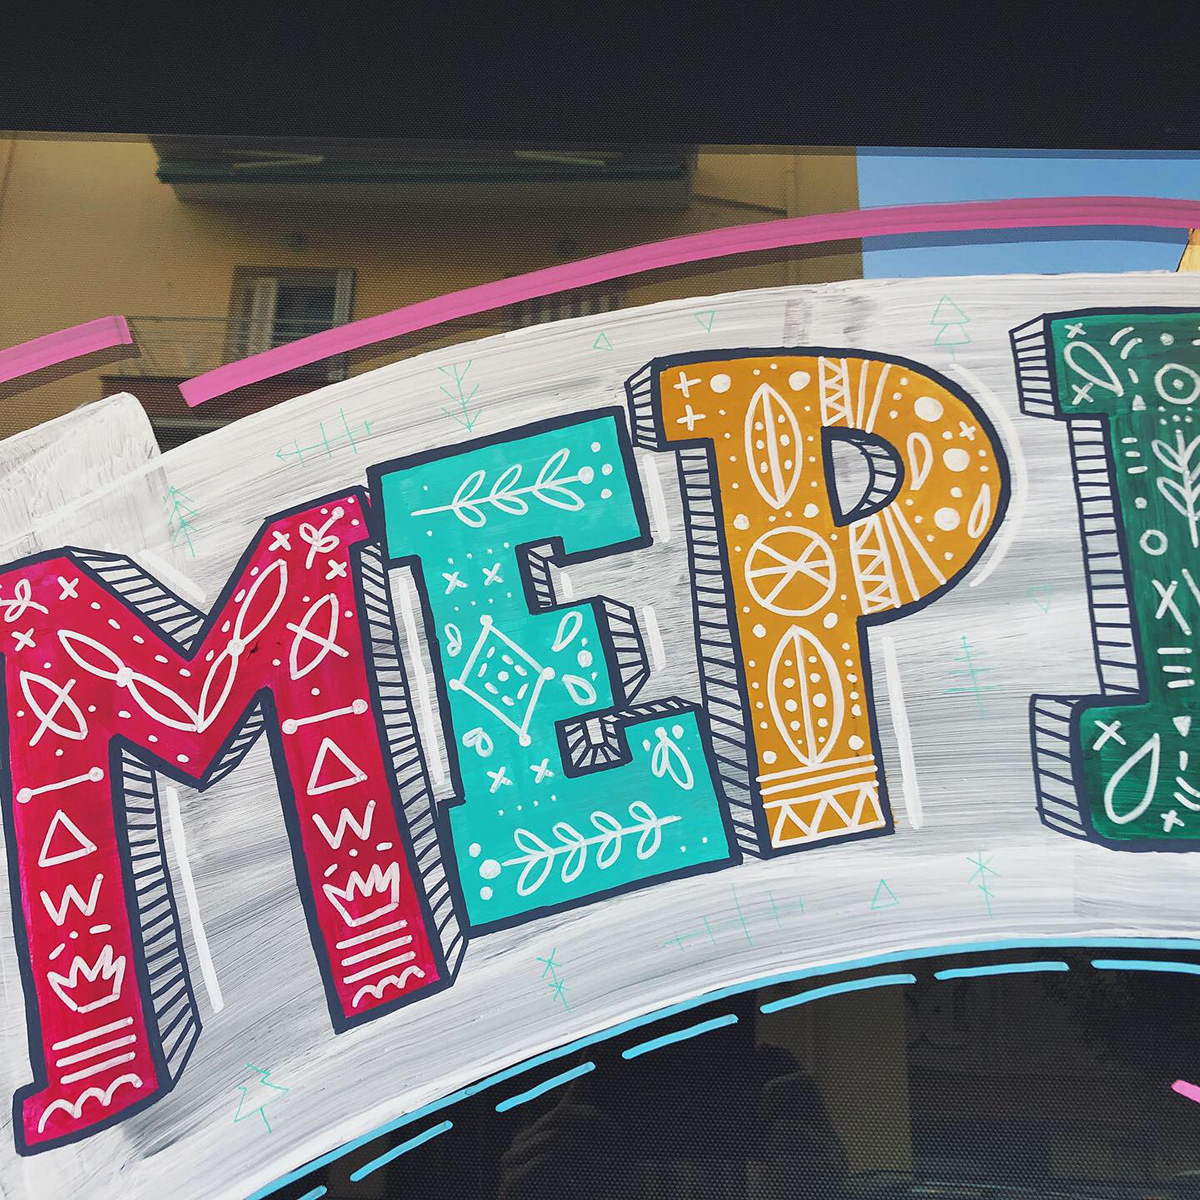 A window display where ''merry xmas'' is handwritten with vivid colours on the glass